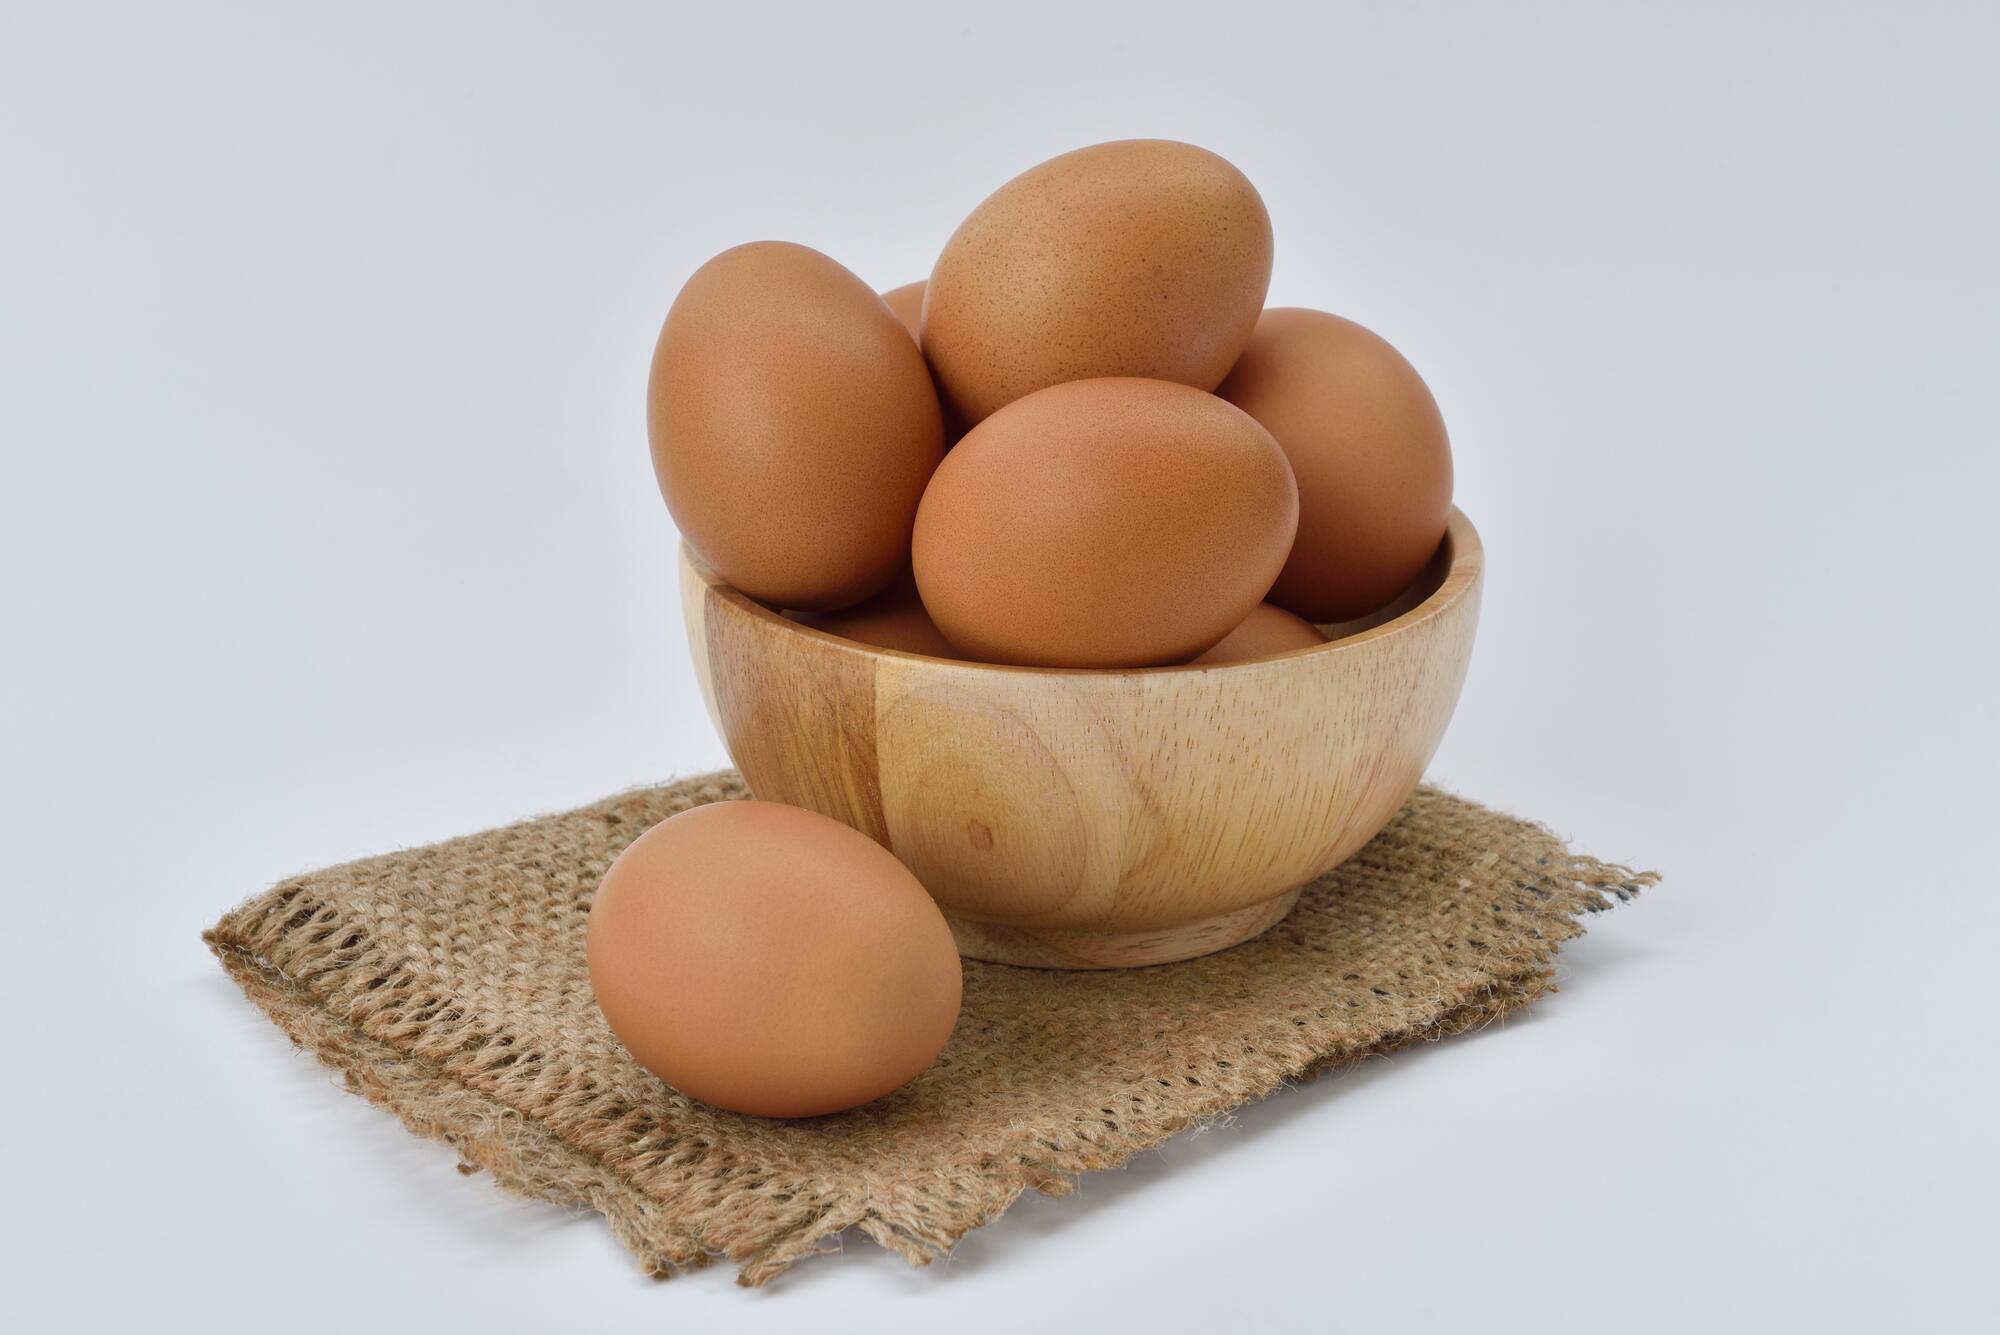 How long you can store chicken eggs